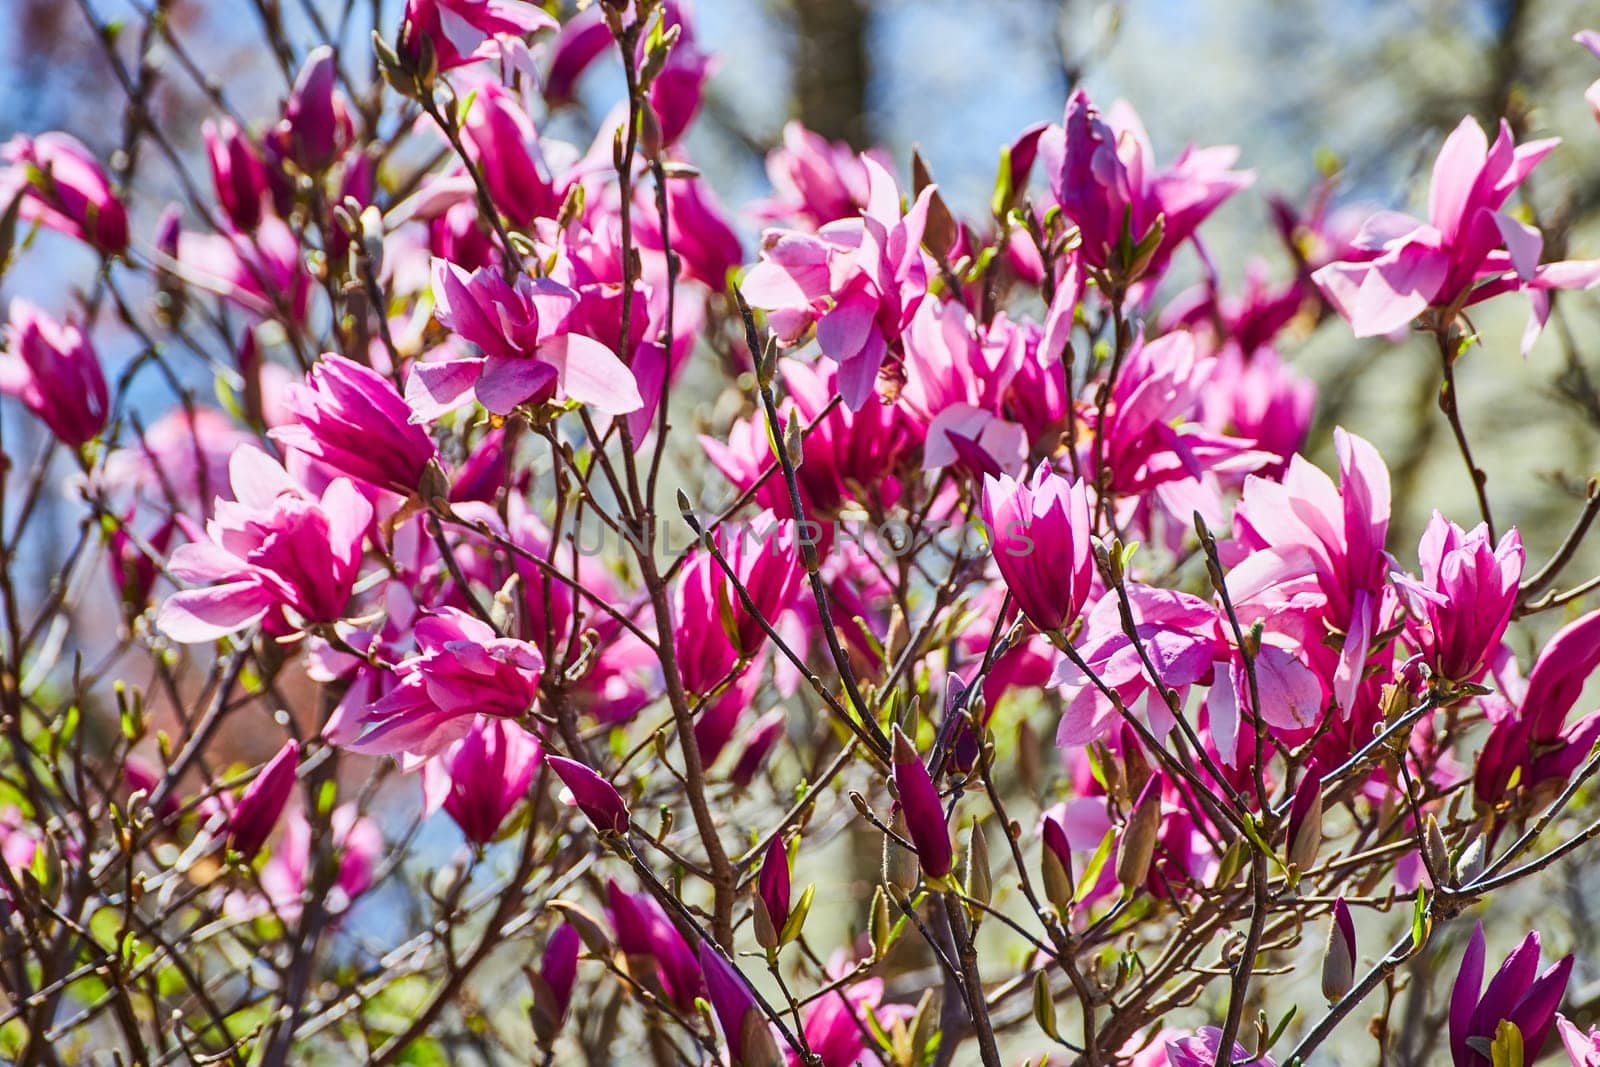 Vibrant pink magnolia blossoms in full bloom under the clear blue sky at Fort Wayne, Indiana, embodying spring's renewal.